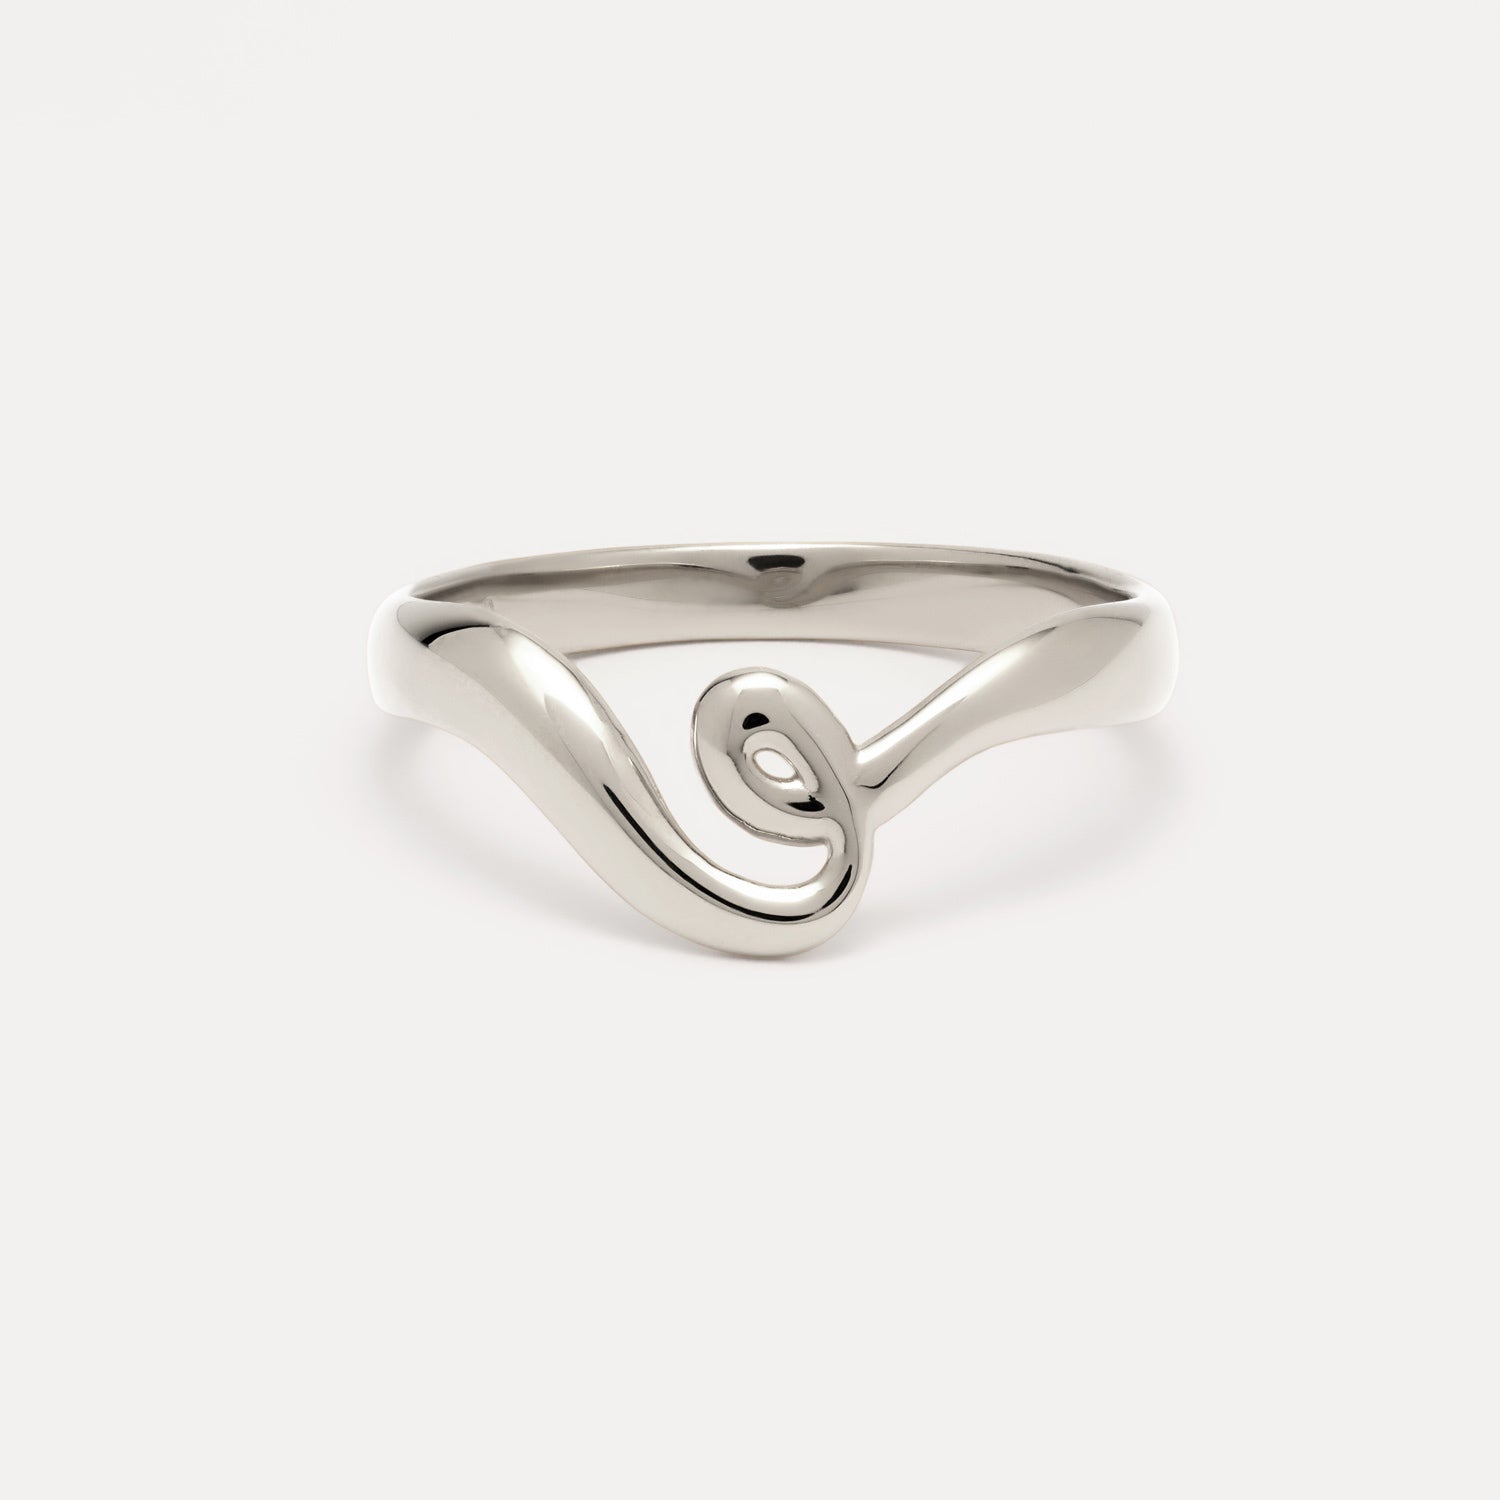 Poise Twirl Ring, recycled Sterling Silver - VEYIA Berlin